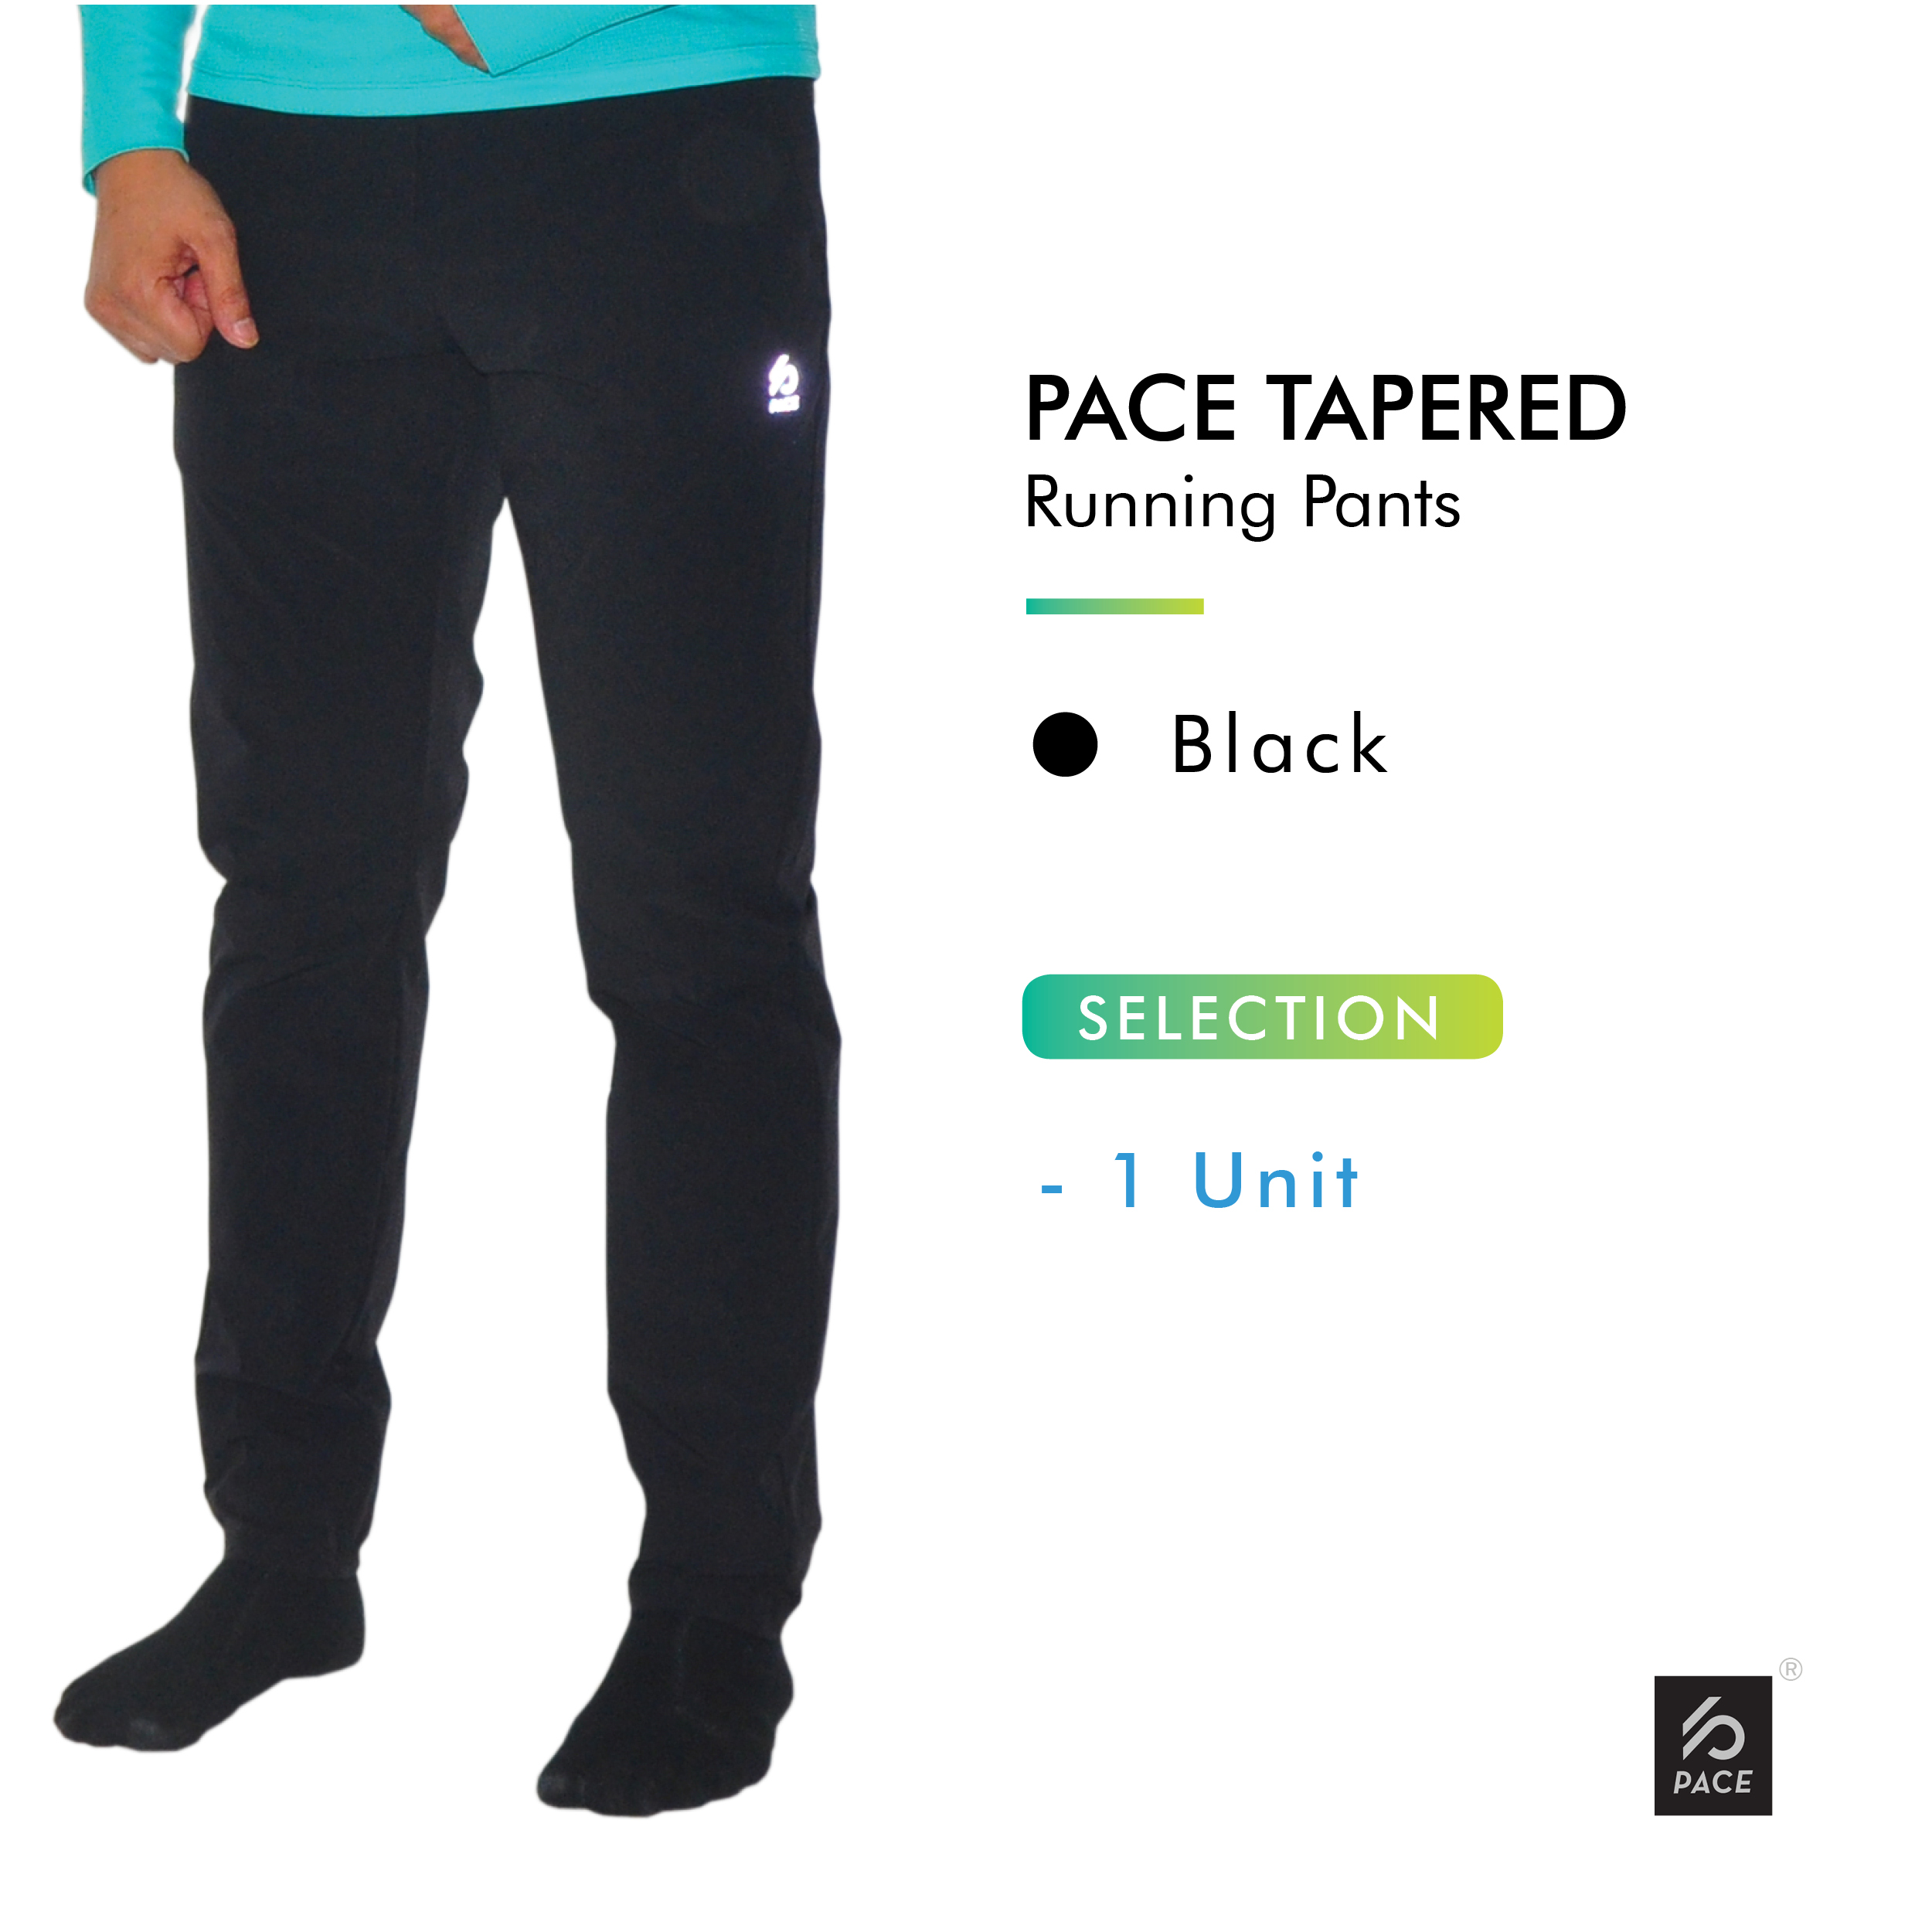 BLACK PACE Tapered Men's Running Pants 